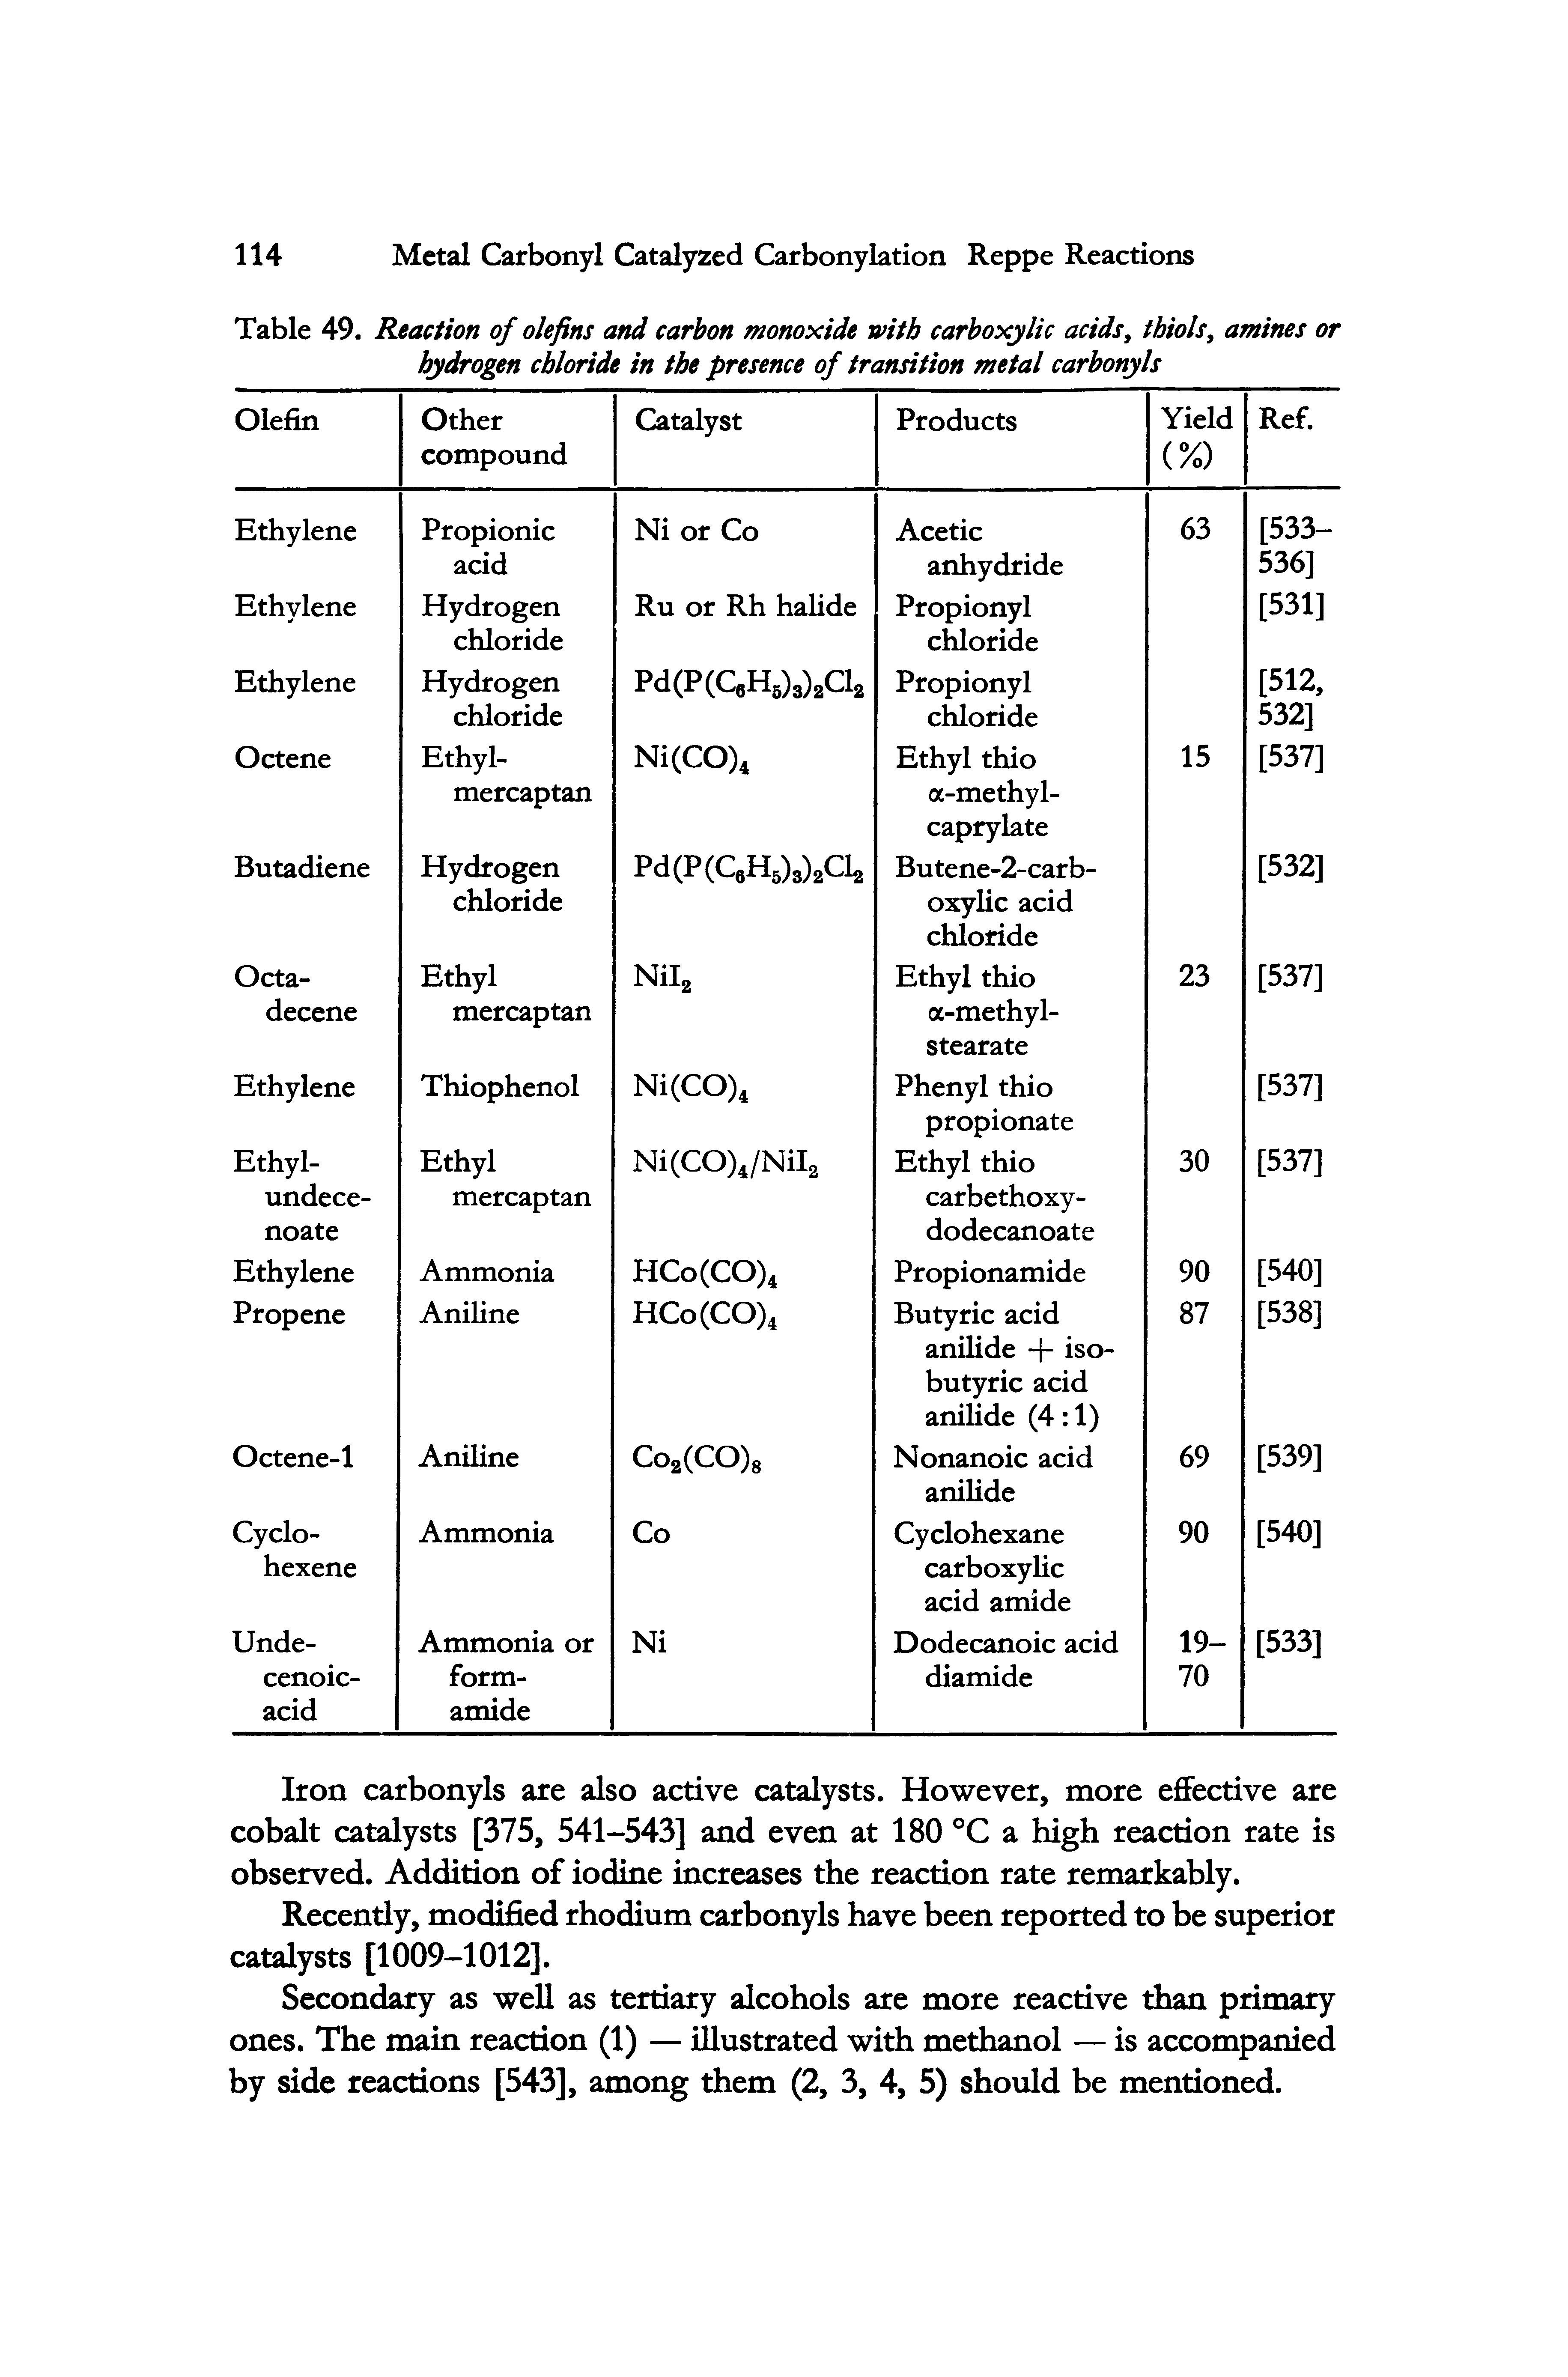 Table 49. Reaction of olefins and carbon monoxide with carboxylic acids, thiols, amines or hydrogen chloride in the presence of transition metal carbonyls...